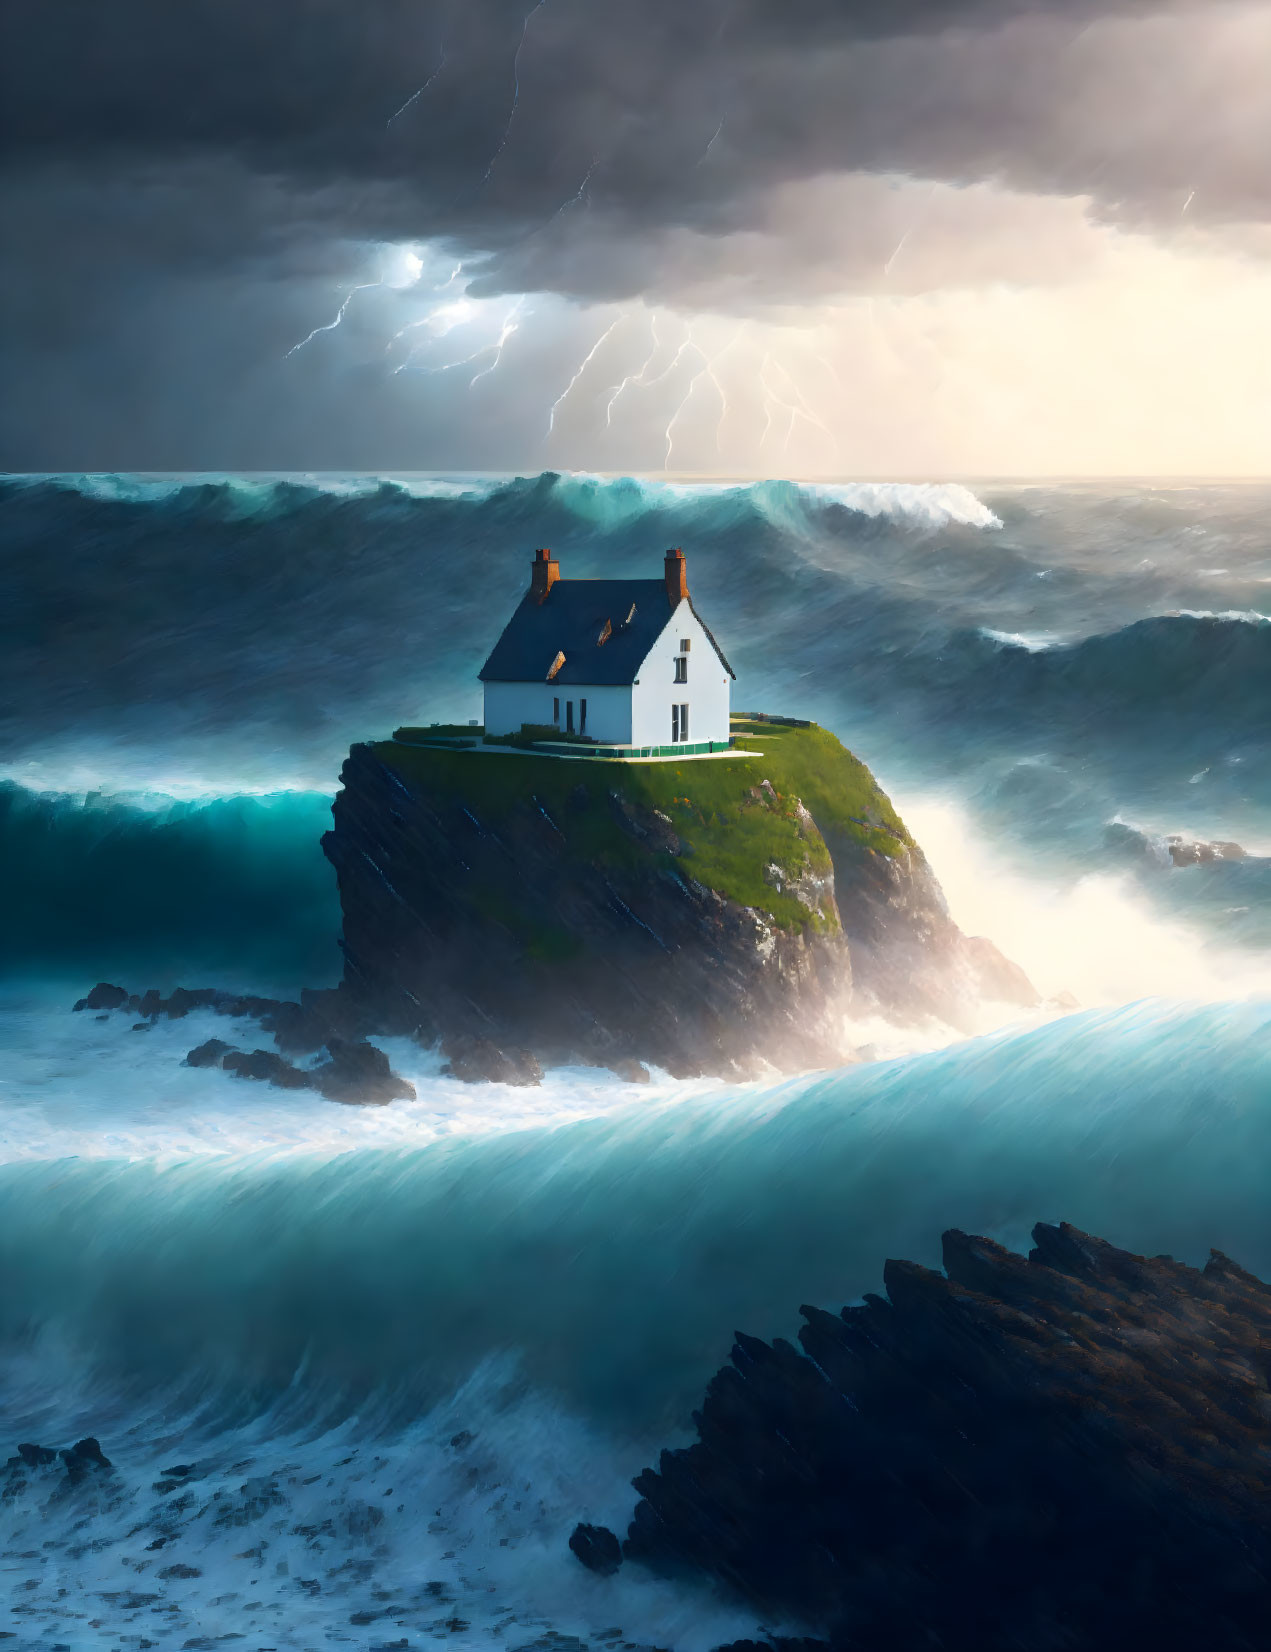 Cliffside house in stormy weather with ocean waves